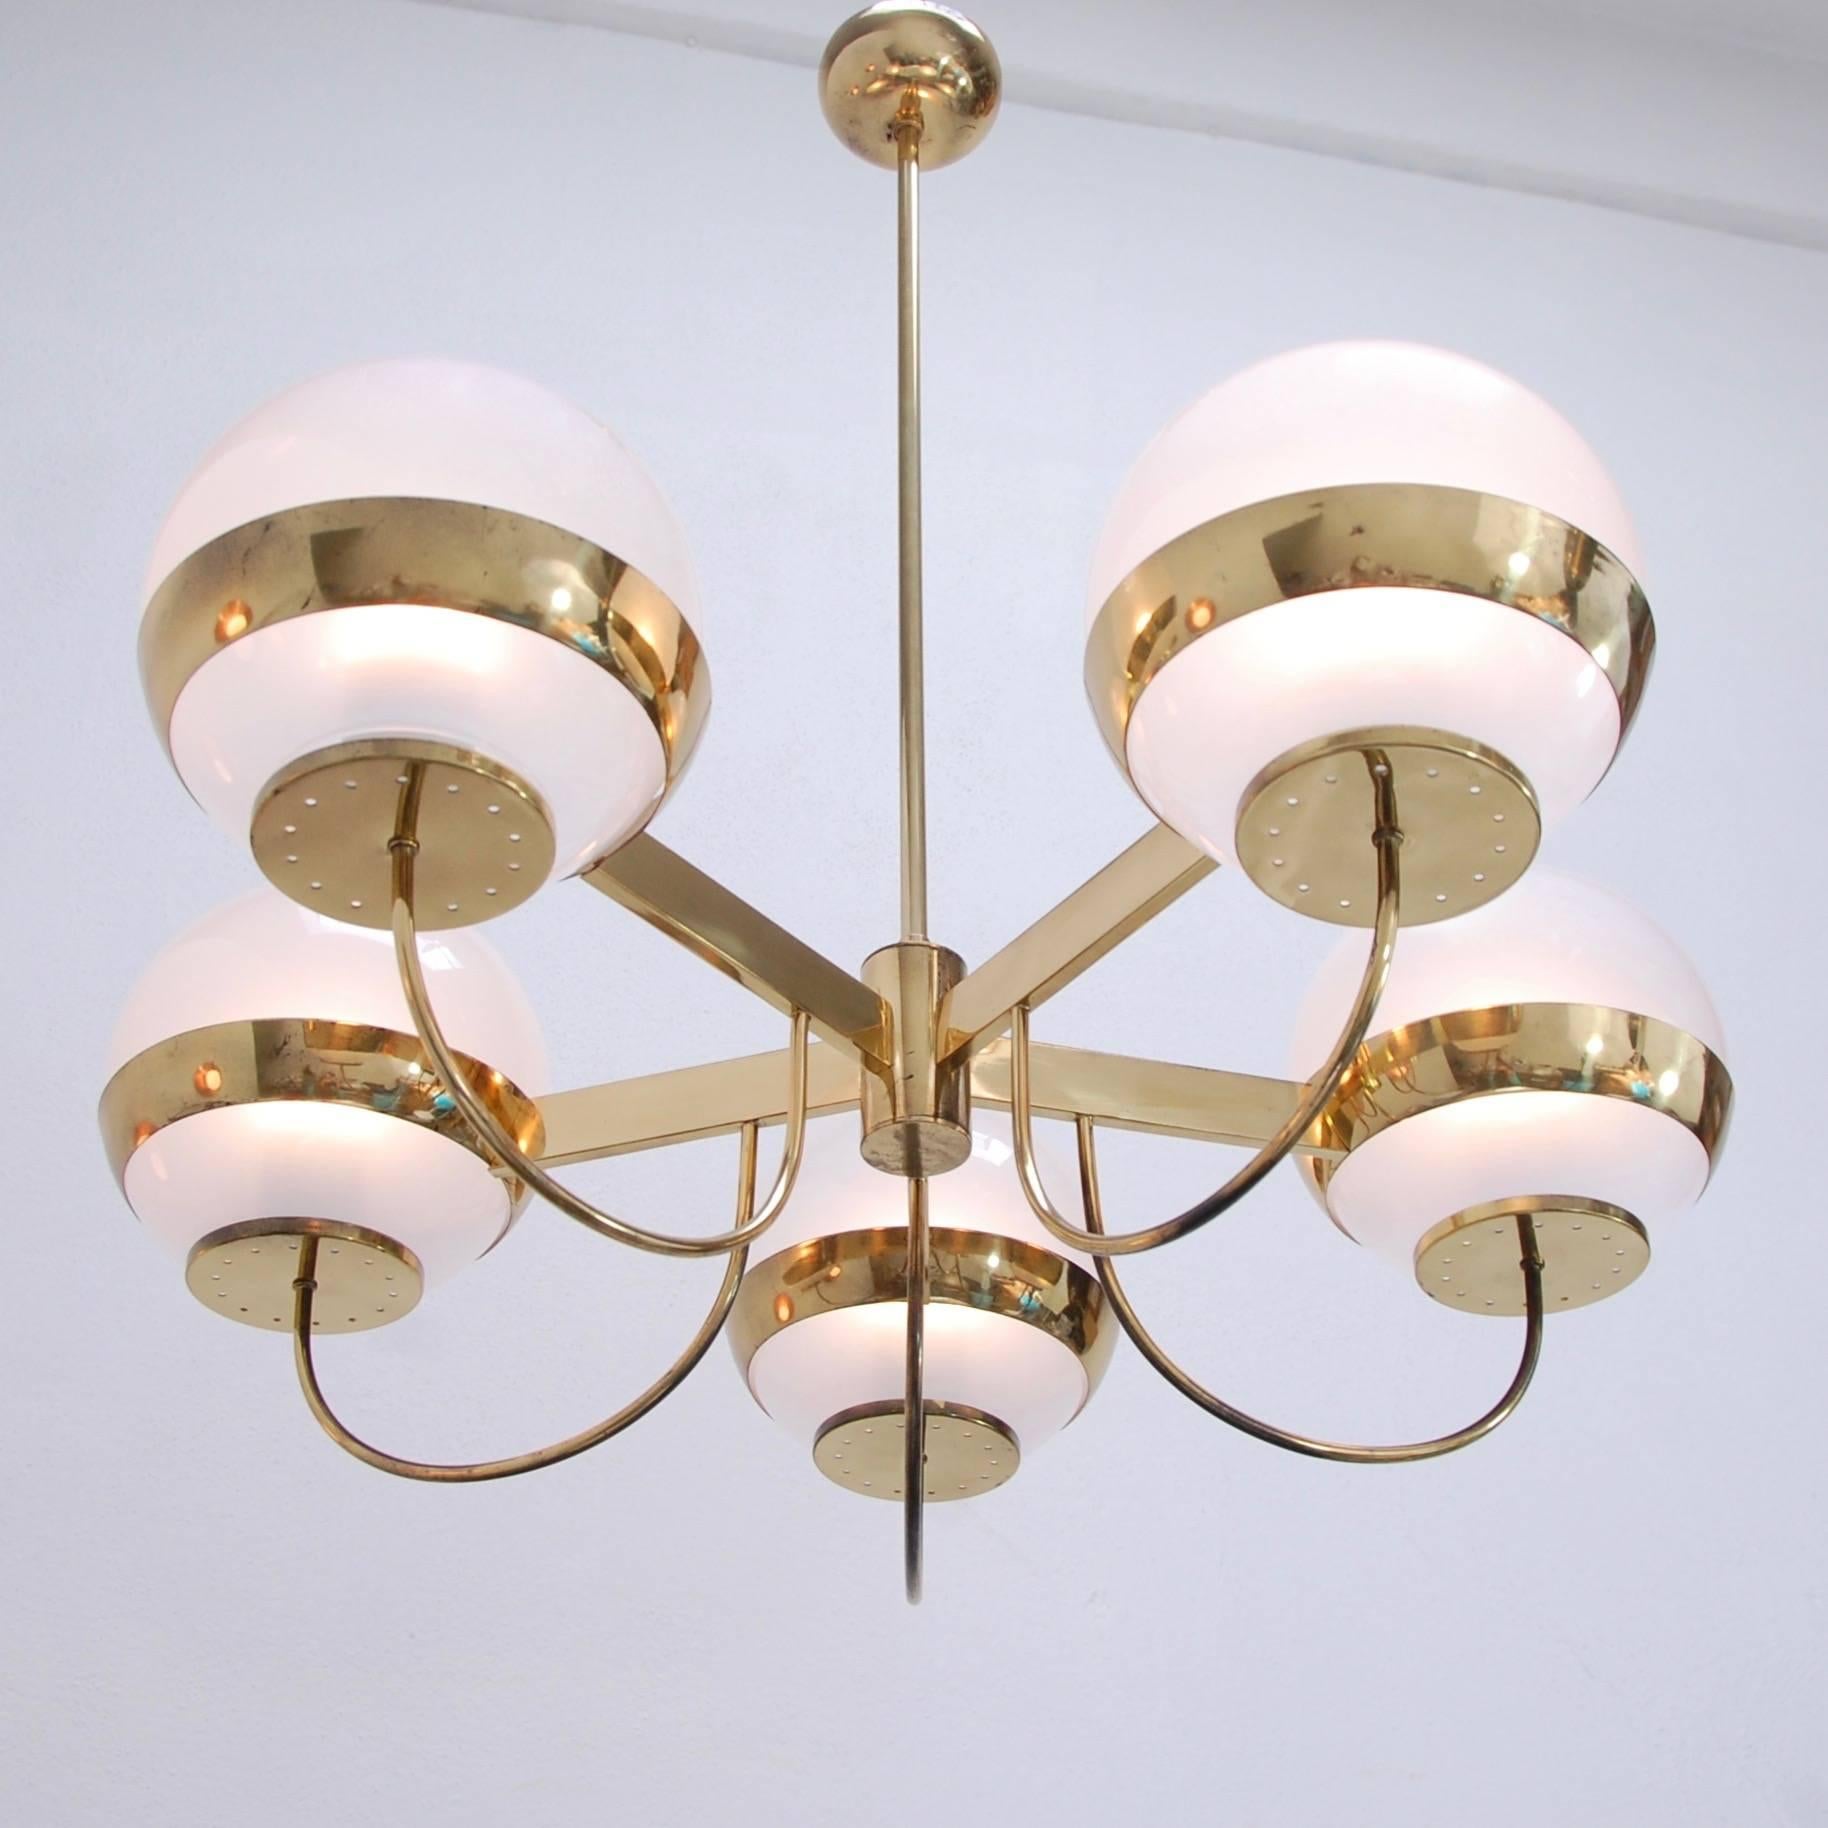 Lamperti Chandelier In Excellent Condition For Sale In Los Angeles, CA